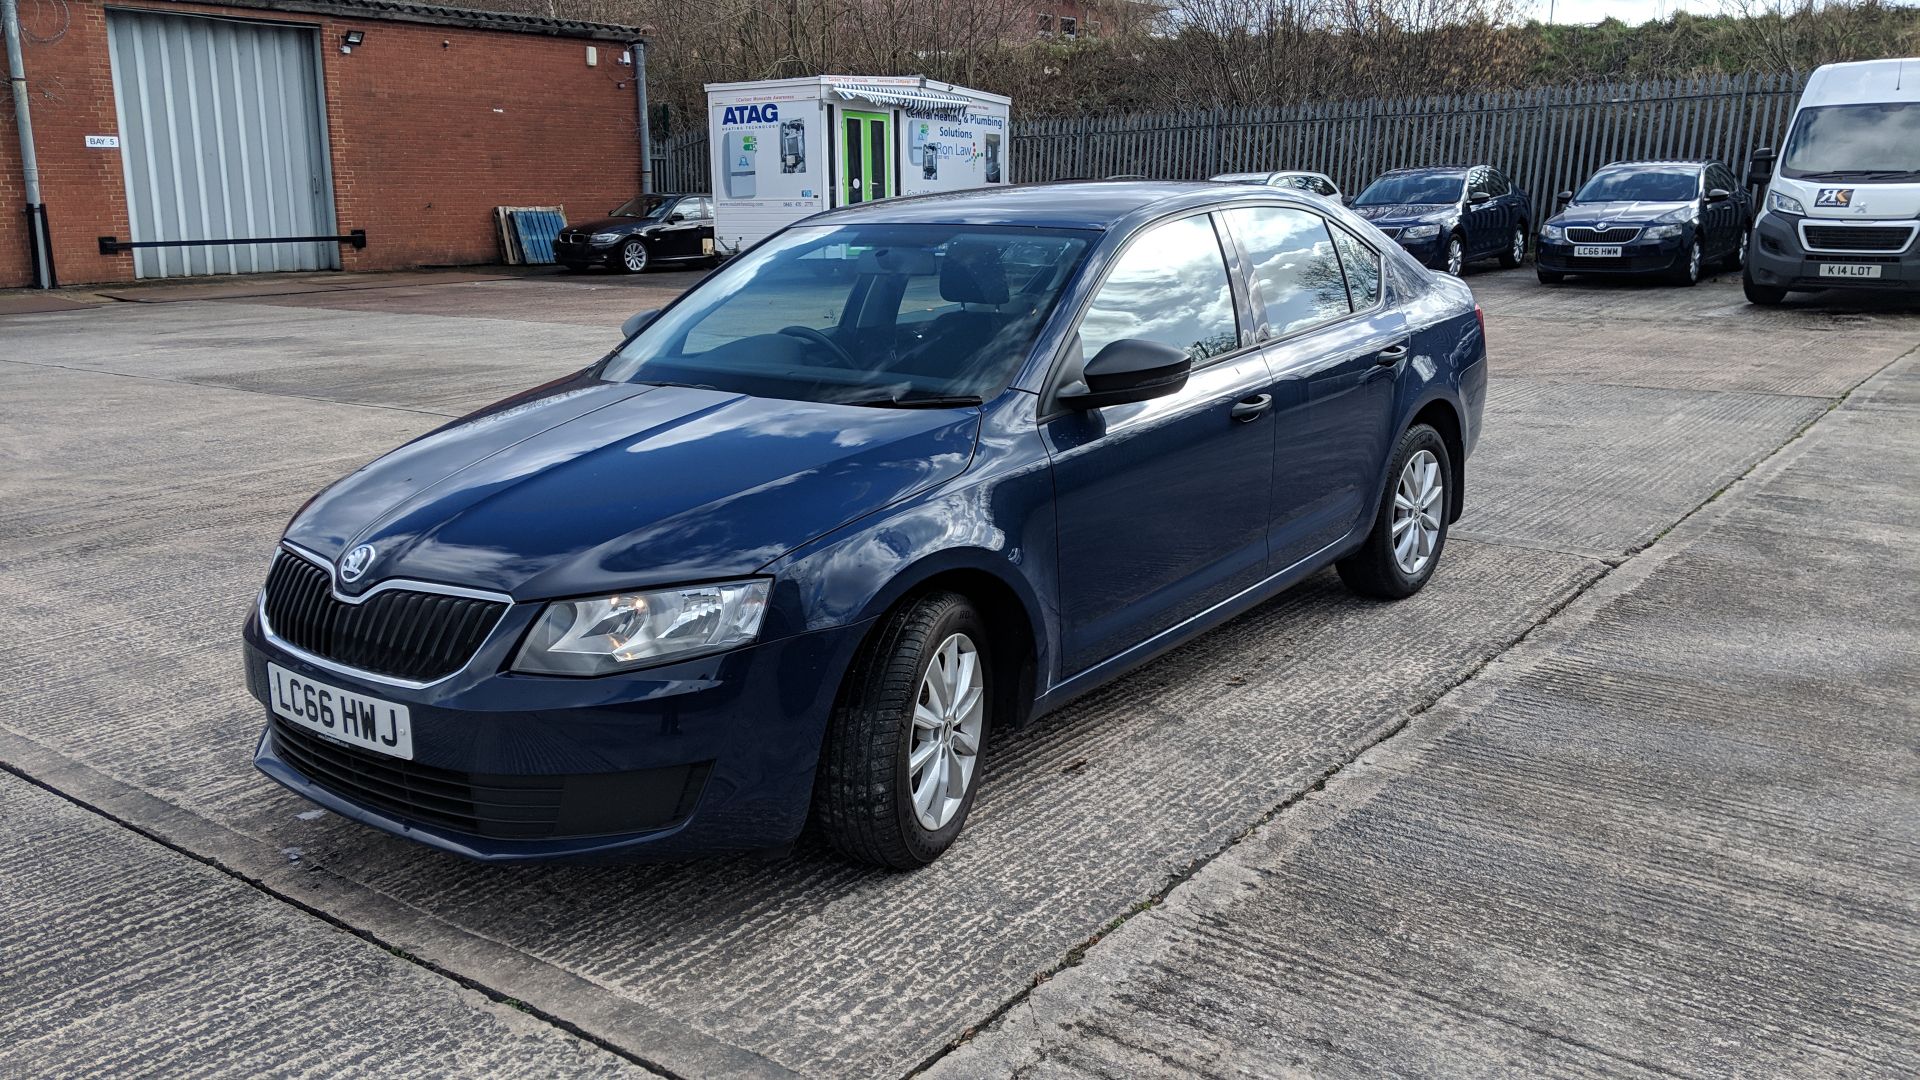 LC66 HWJ Skoda Octavia S TDI S-A 1598cc diesel engine. Colour: Blue. First registered: 06.02.17. - Image 6 of 52